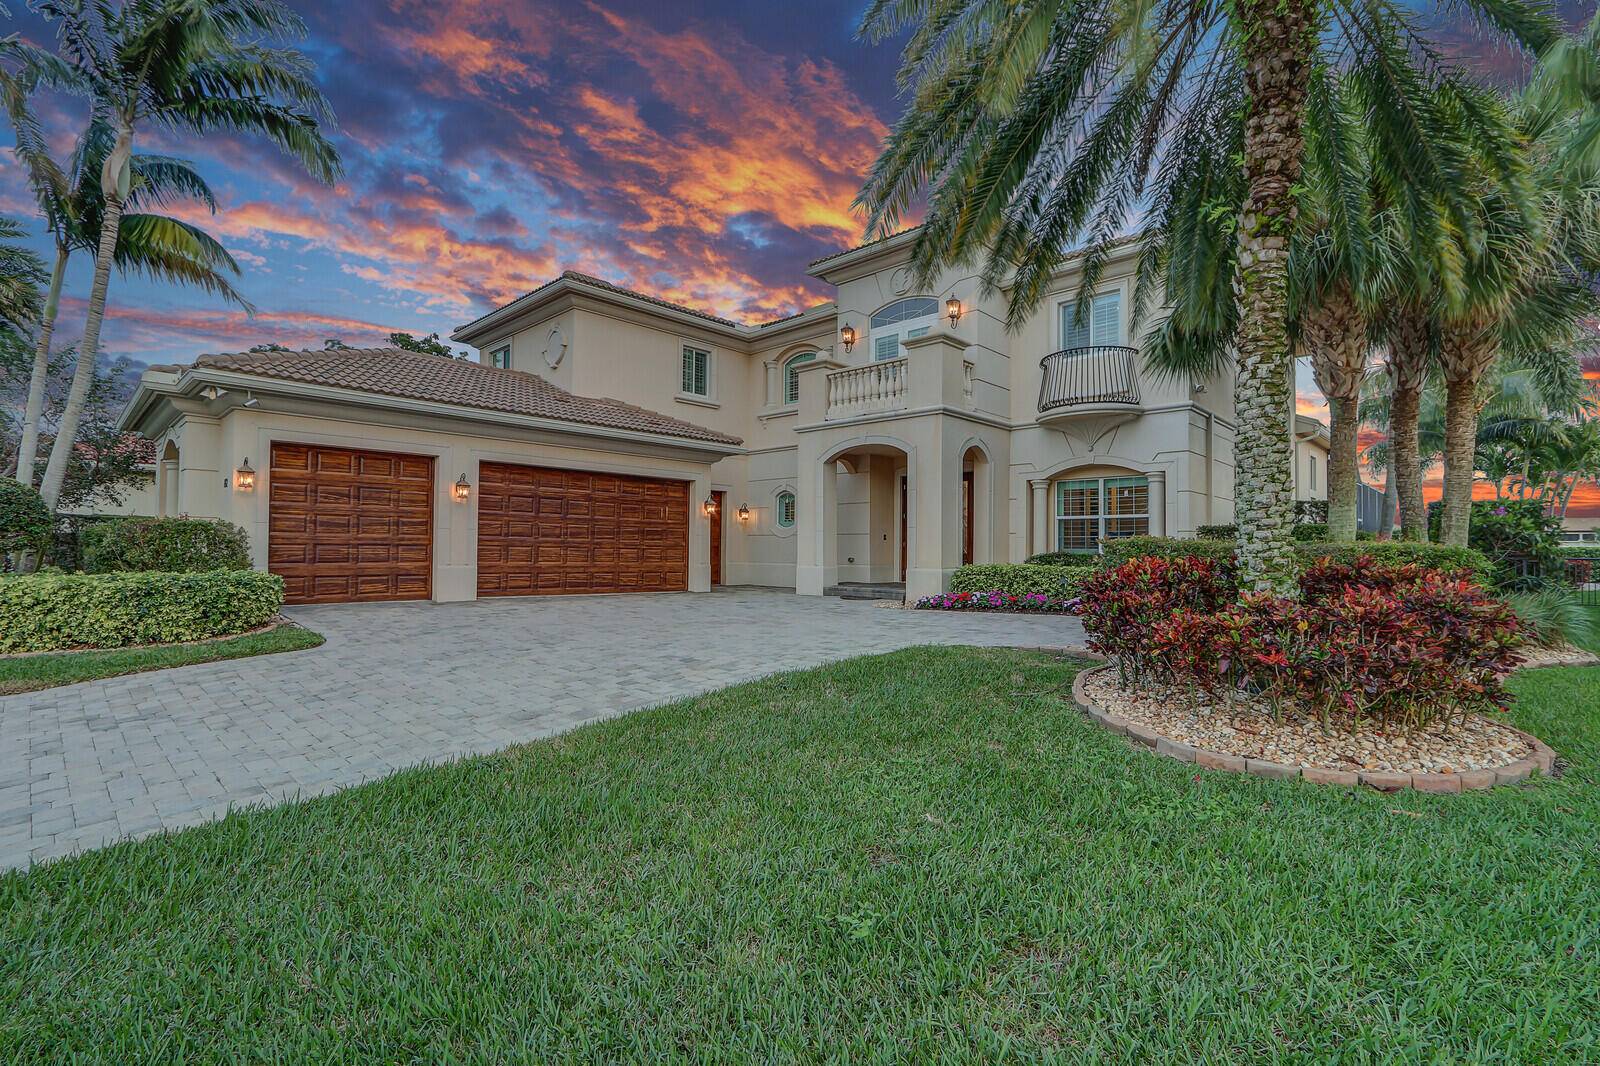 Luxuriously appointed and located in the private gated golf course community of Jupiter Country Club, this coveted Carina model is a wonderful floor plan that offers 5 bedrooms, 5 1 ...